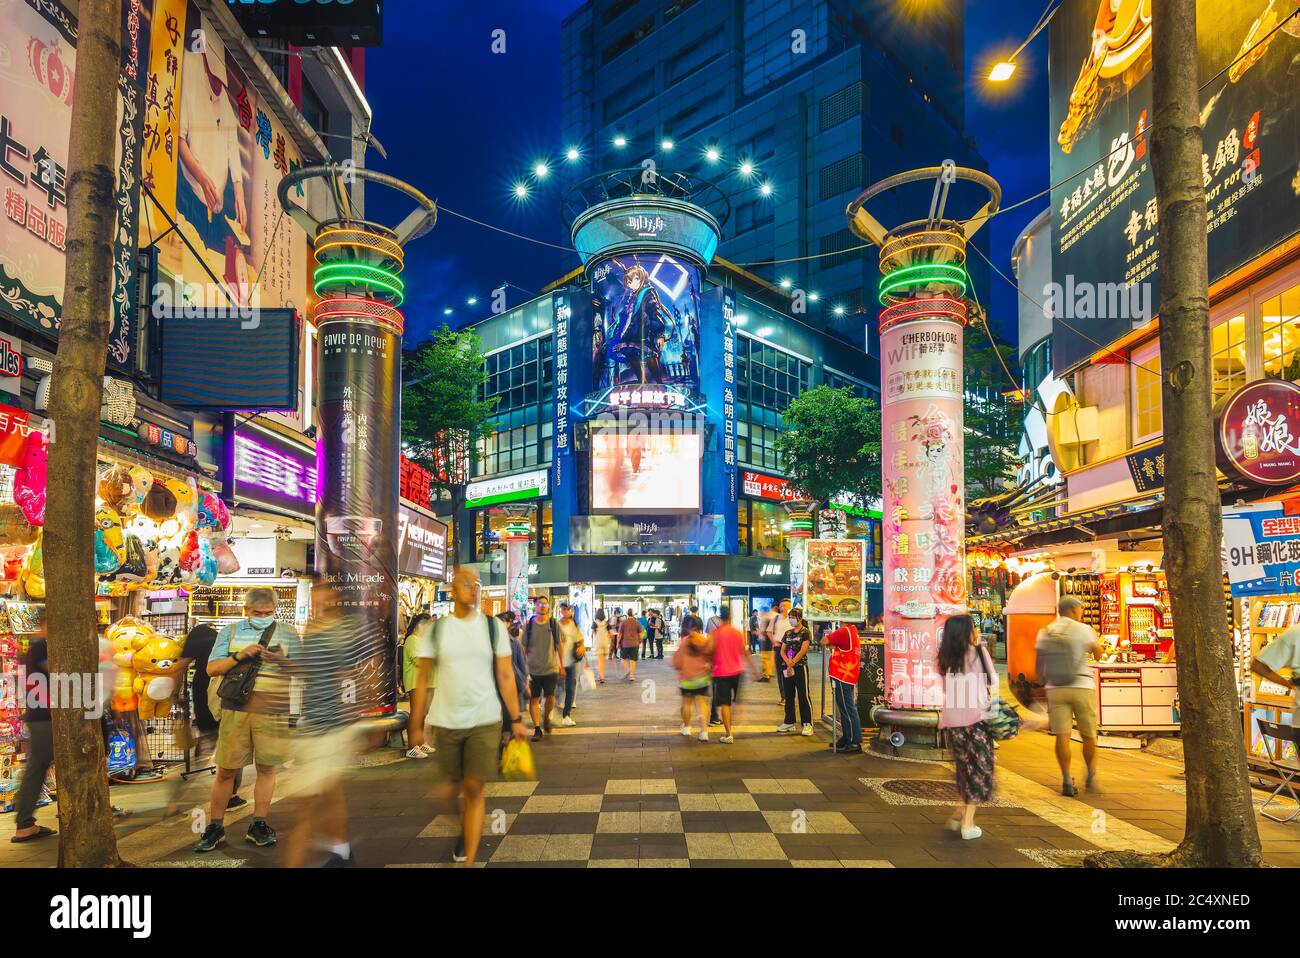 Taipei, Taiwan - June 29, 2020: ximending district, one of the most popular tourist destination in taipei , also called 'Harajuku of Taipei' and the ' Stock Photo